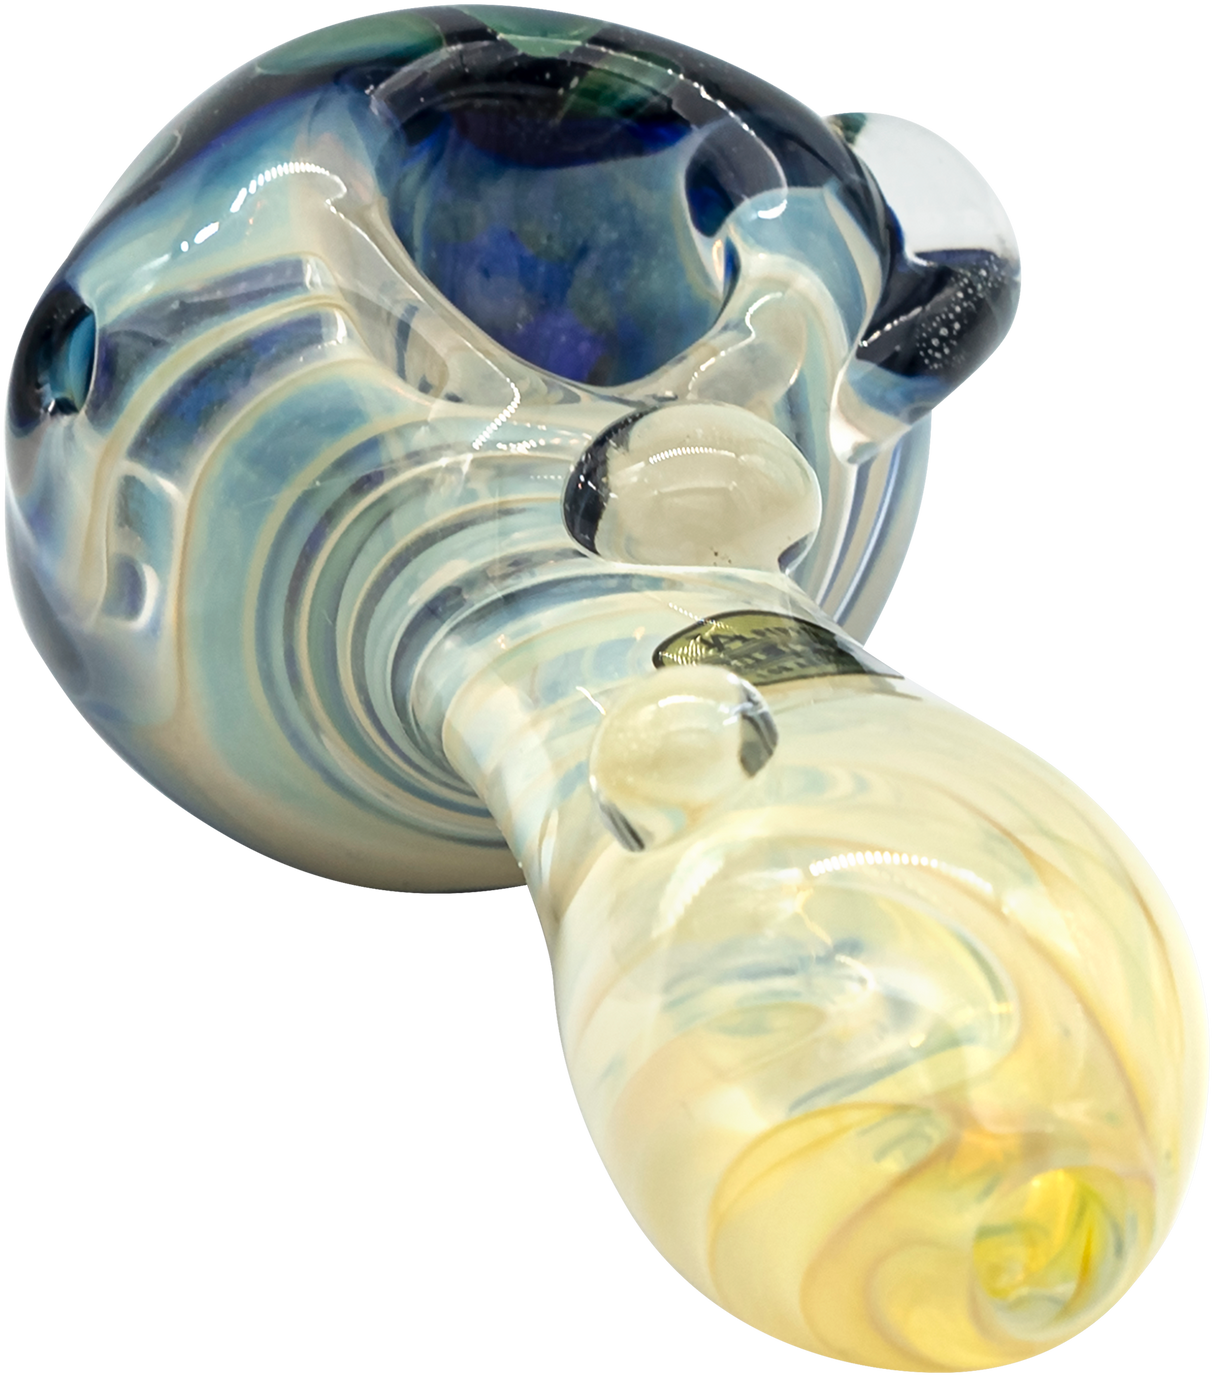 LA Pipes "The Hive" Honeycomb Color Changing Glass Pipe, 4" Spoon Design